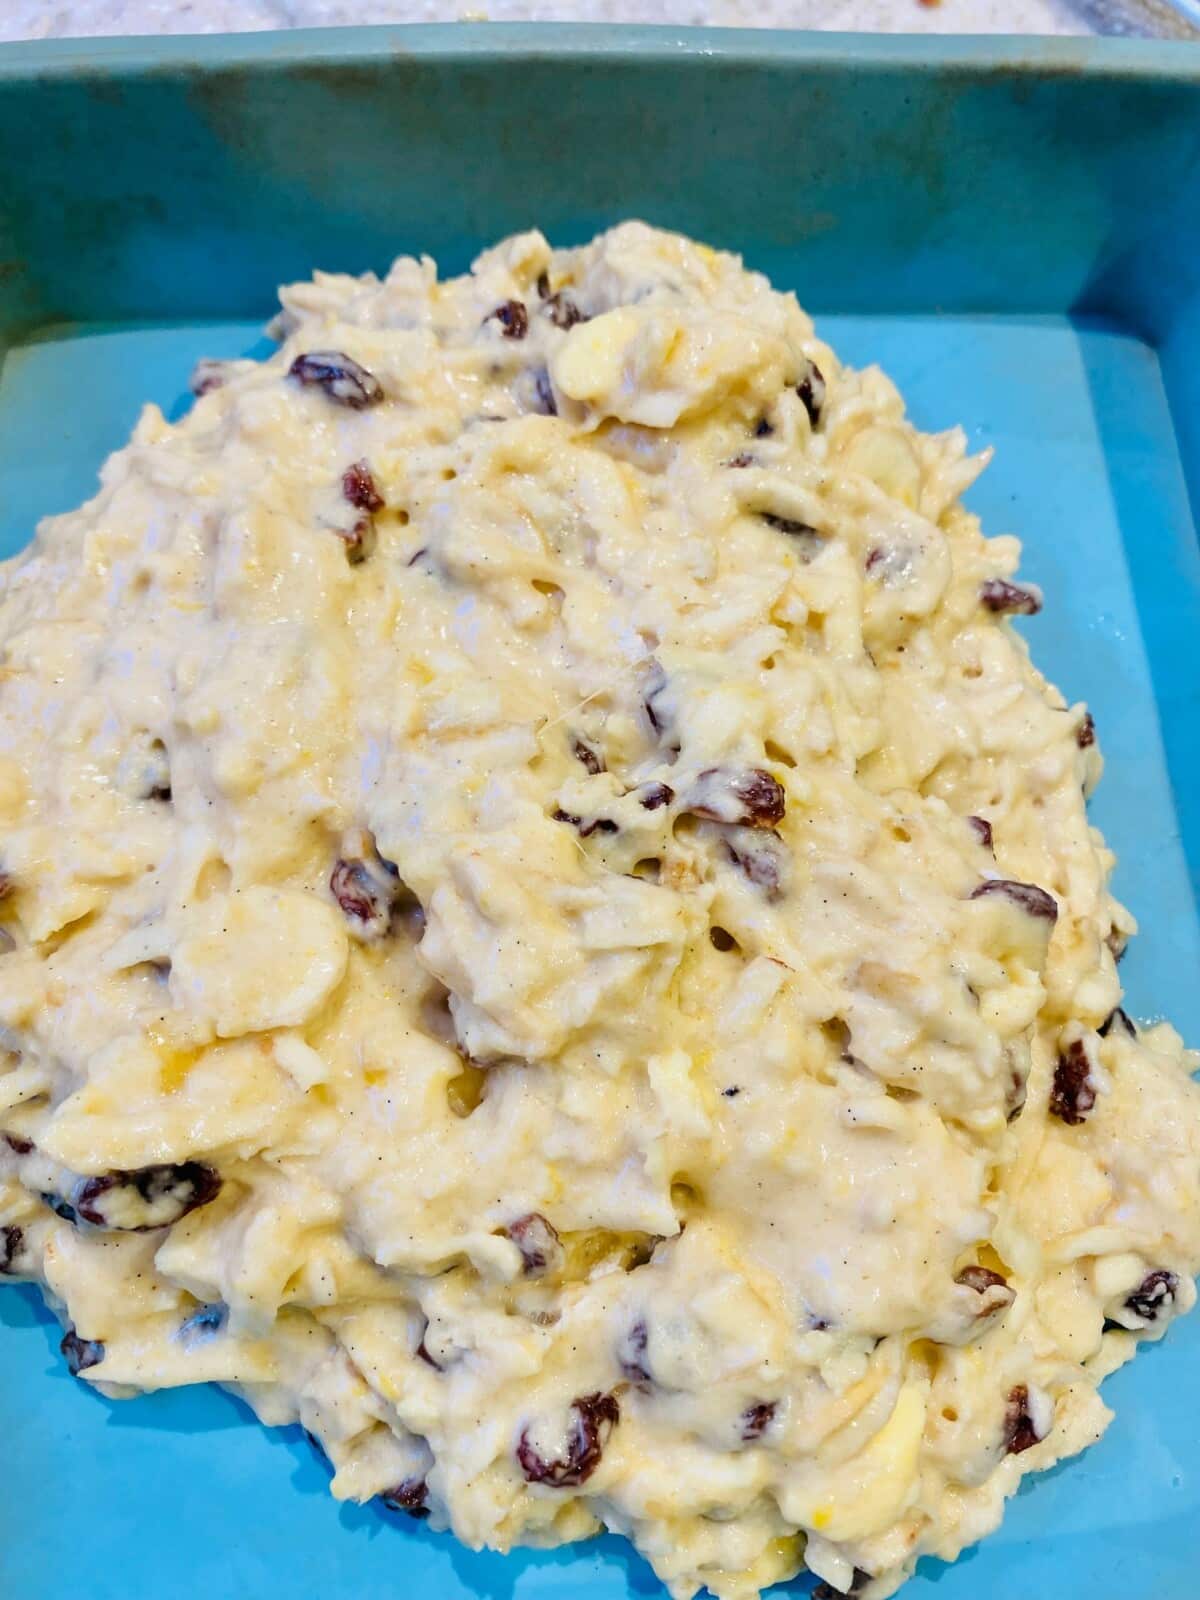 parsnip cake - raw mixture in a blue silicone baking tin